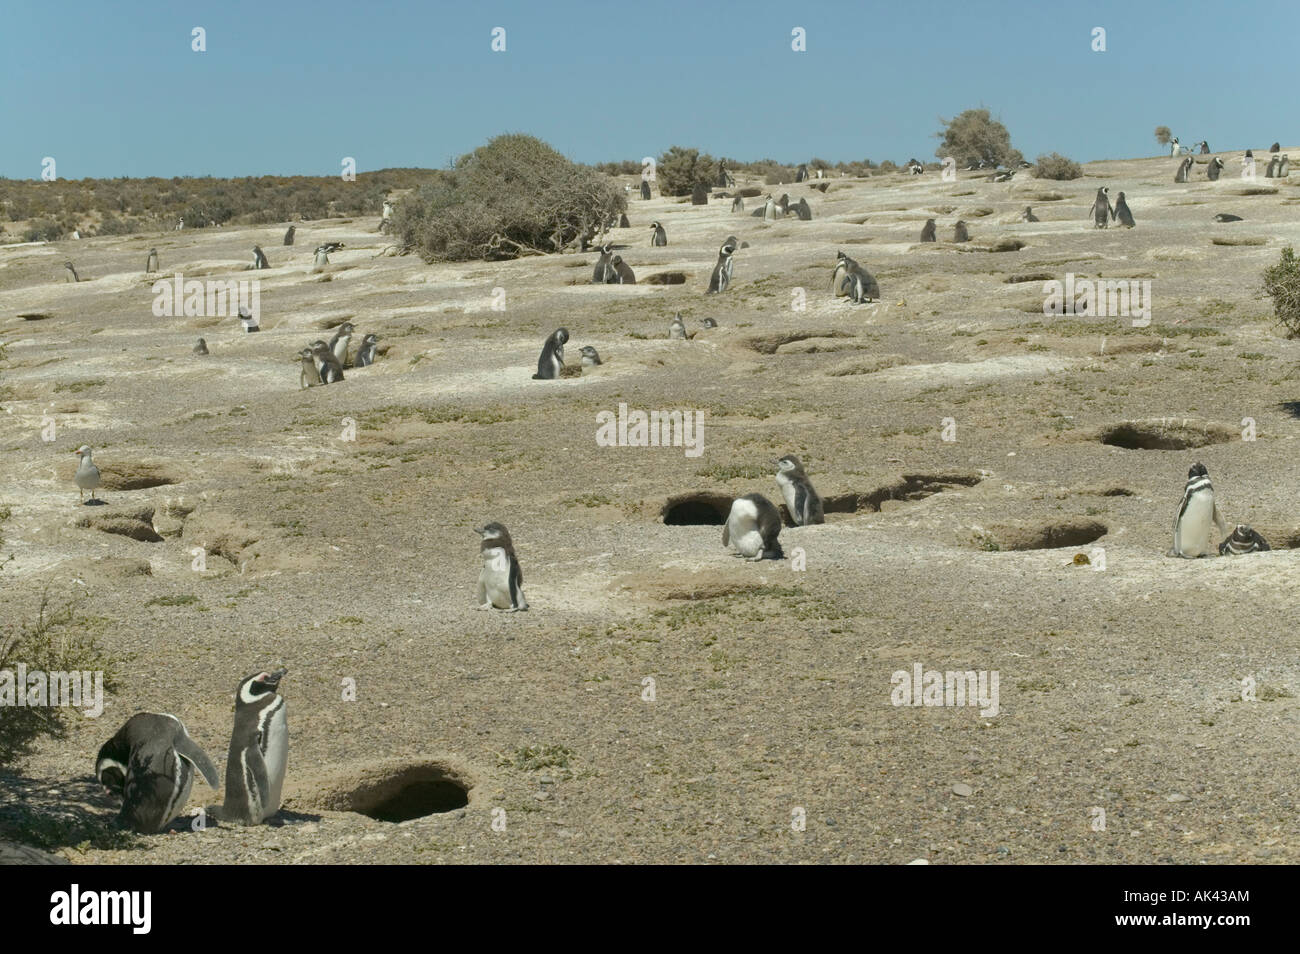 A view of scattered penguins standing outside their burrows at Punta Tombo nr Trelew Patagonia Argentina Stock Photo